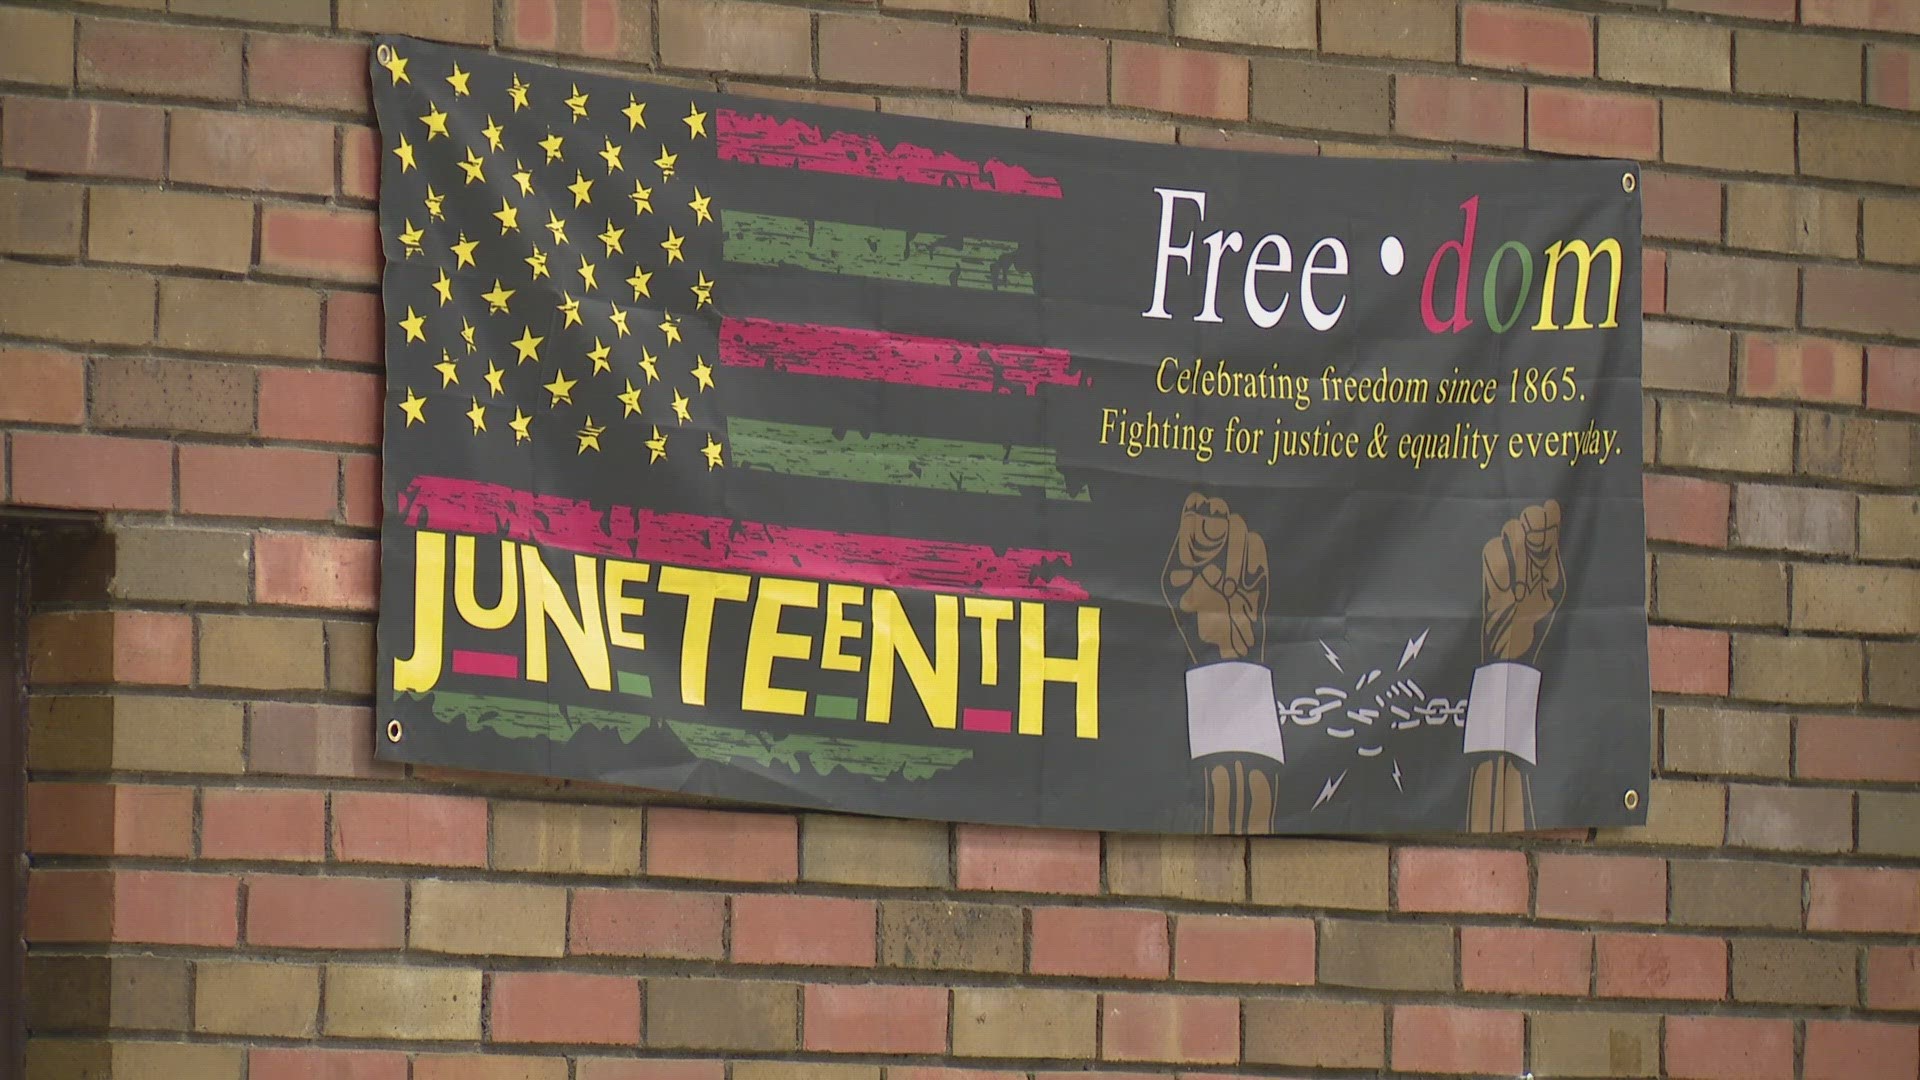 Group kicks off Juneteenth with cleanup project in north St. Louis County. Area leaders, students and police officers were out volunteering Monday.